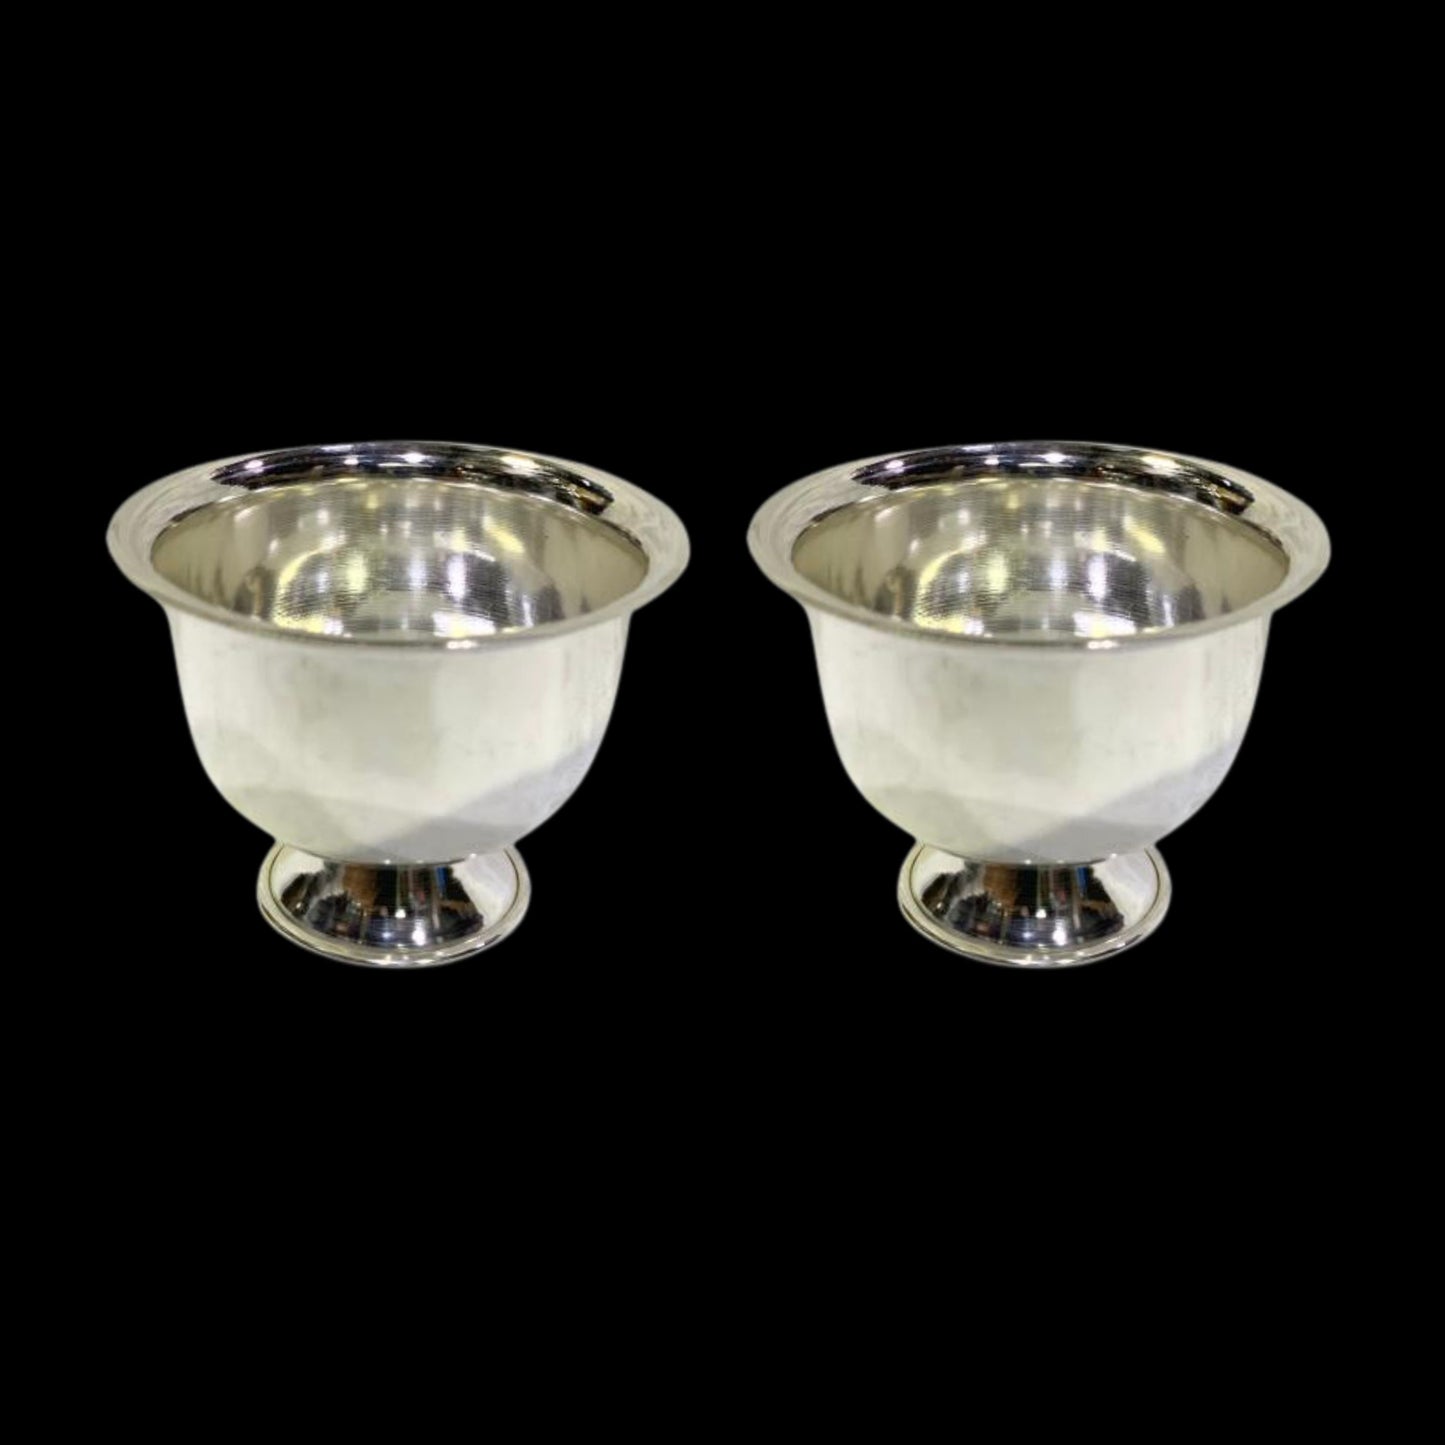 62 gms Pure Silver Padam Cups (Set Of 2) - Mirror Finished BIS Hallmarked